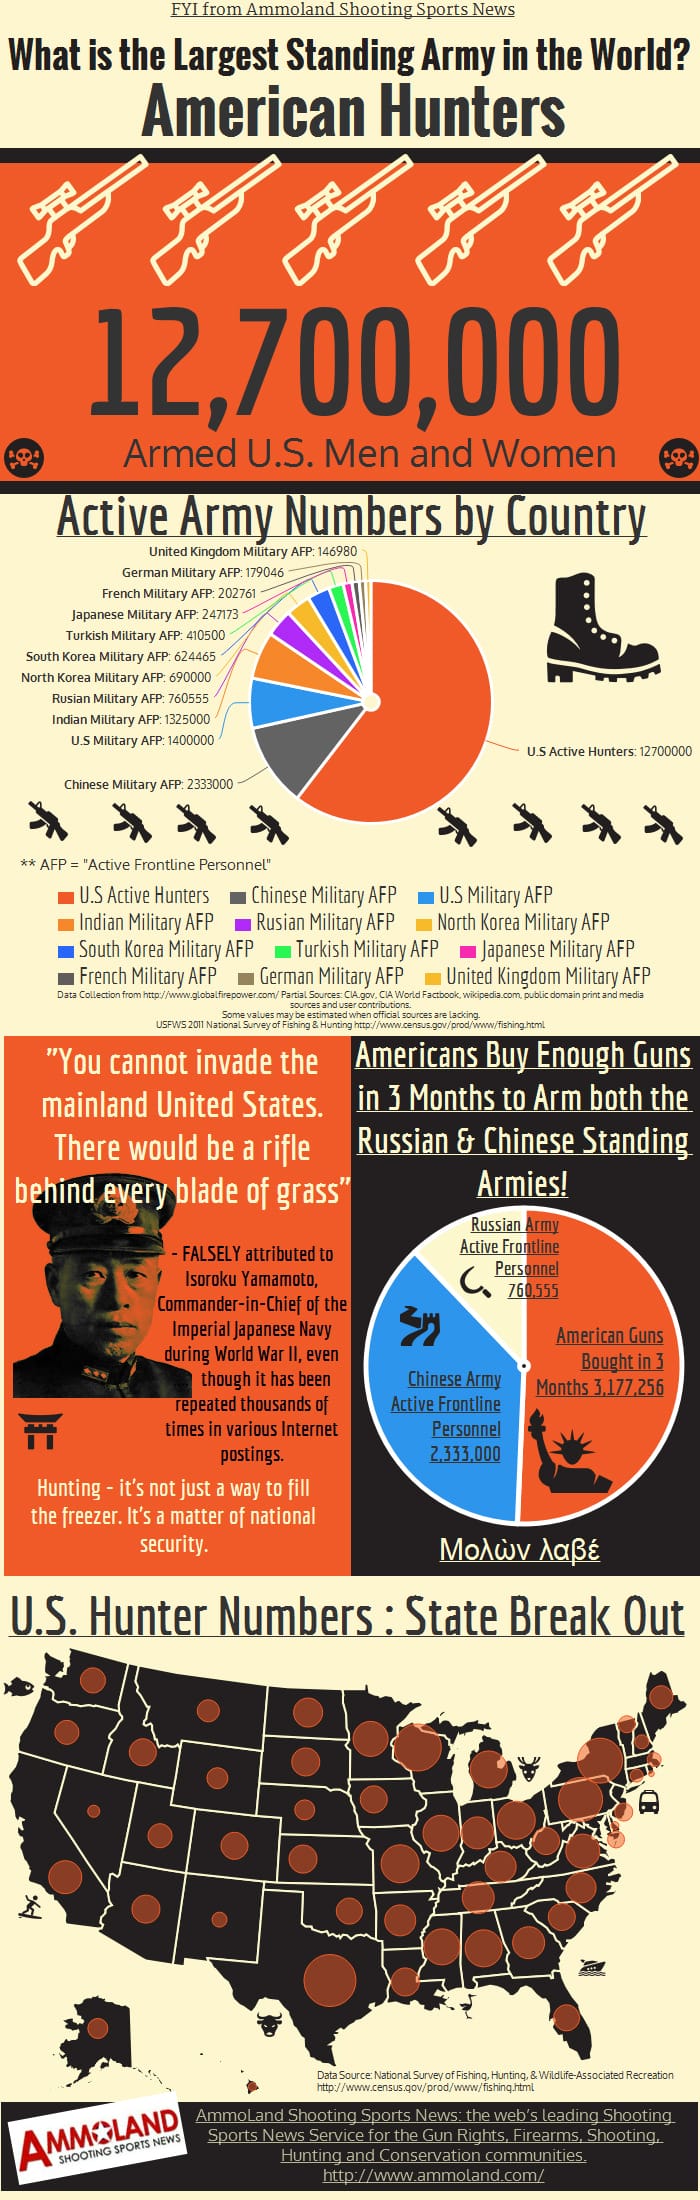 Largest Standing Army in the World is Not Who You'd Expect ~ InfoGraphic